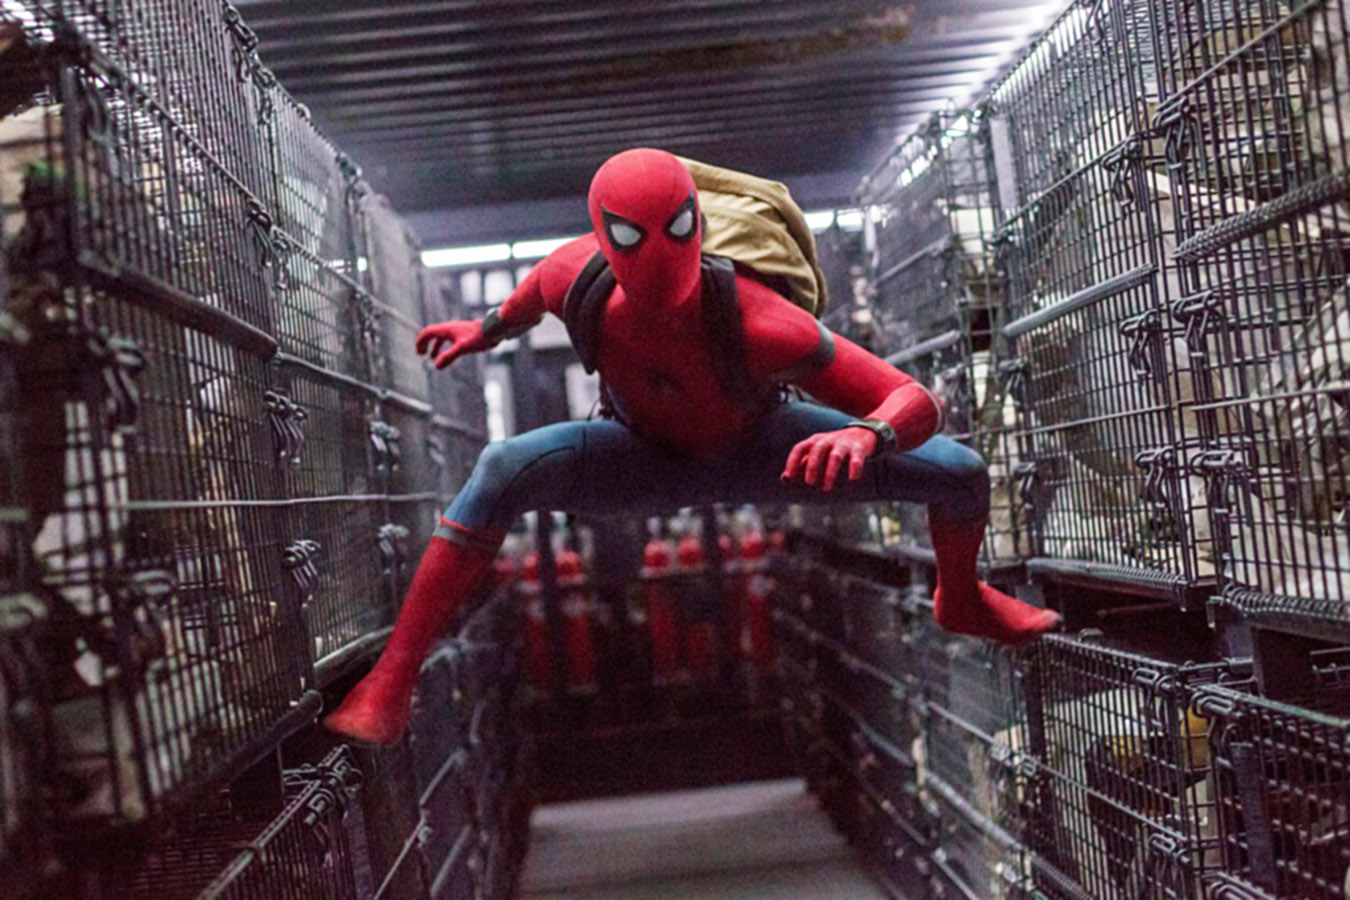 Spider-Man in a truck filled with animal cages